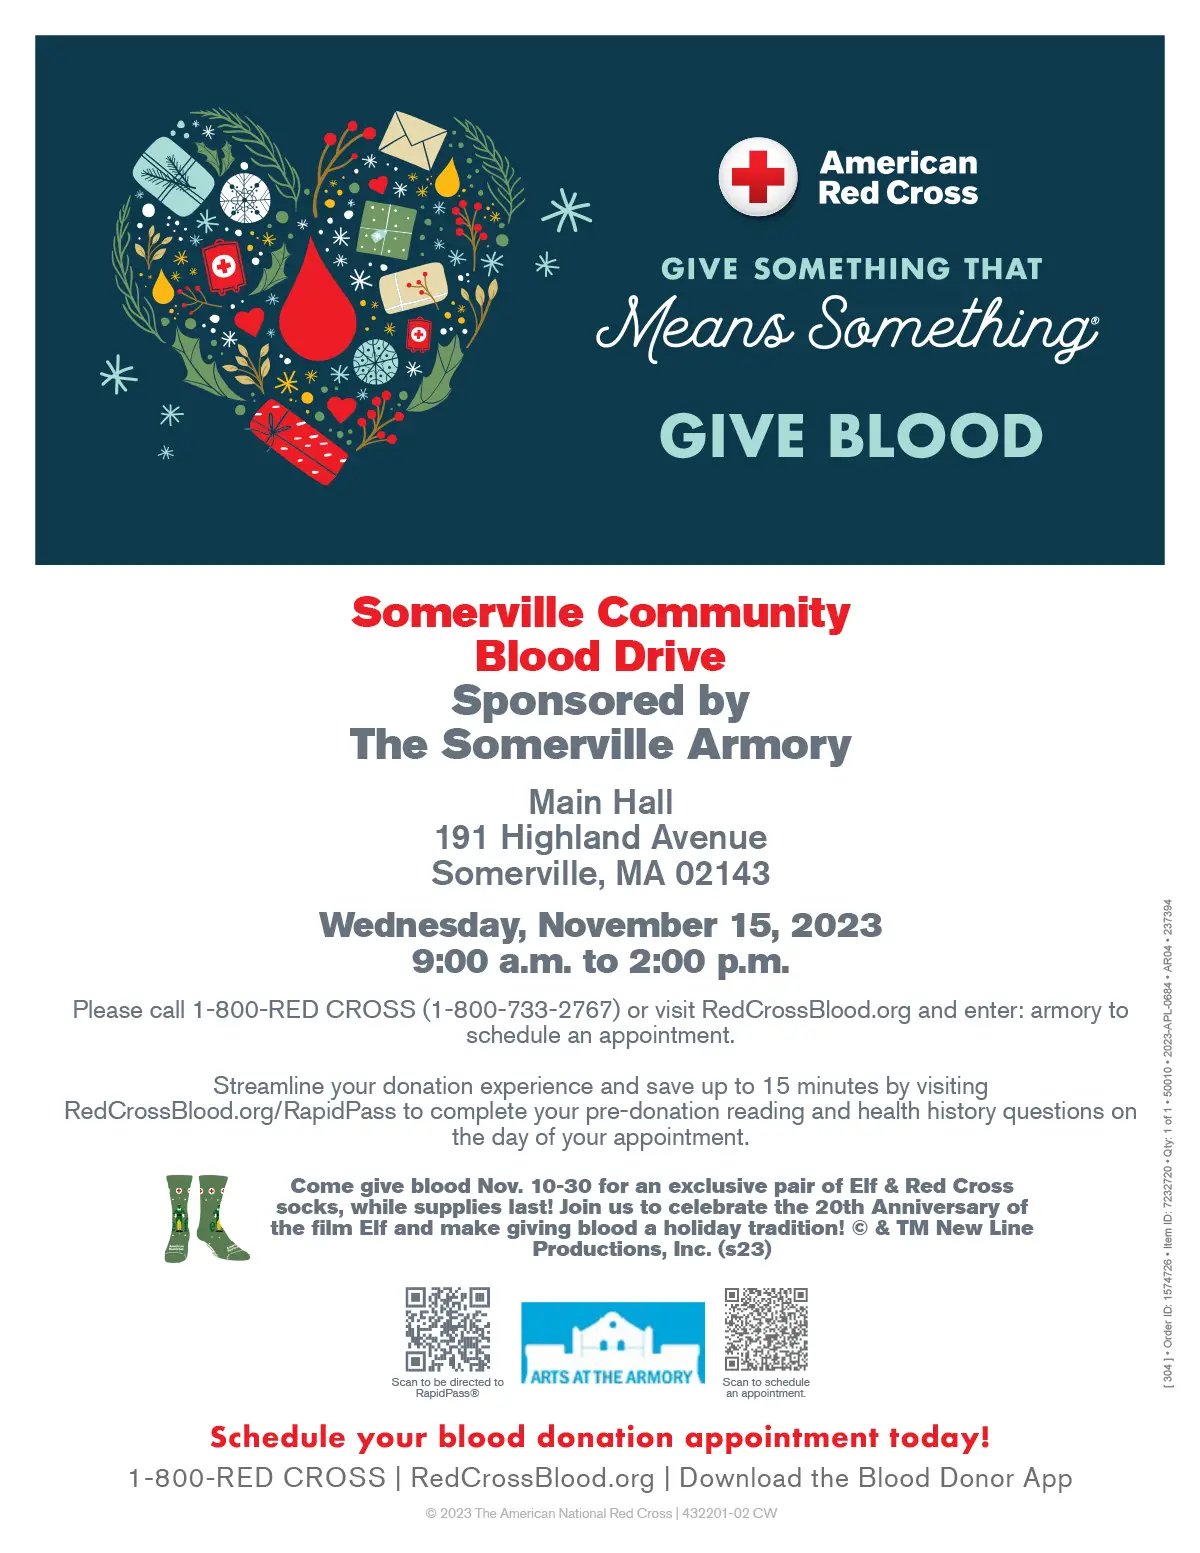 Red Cross Blood Drive at the Armory